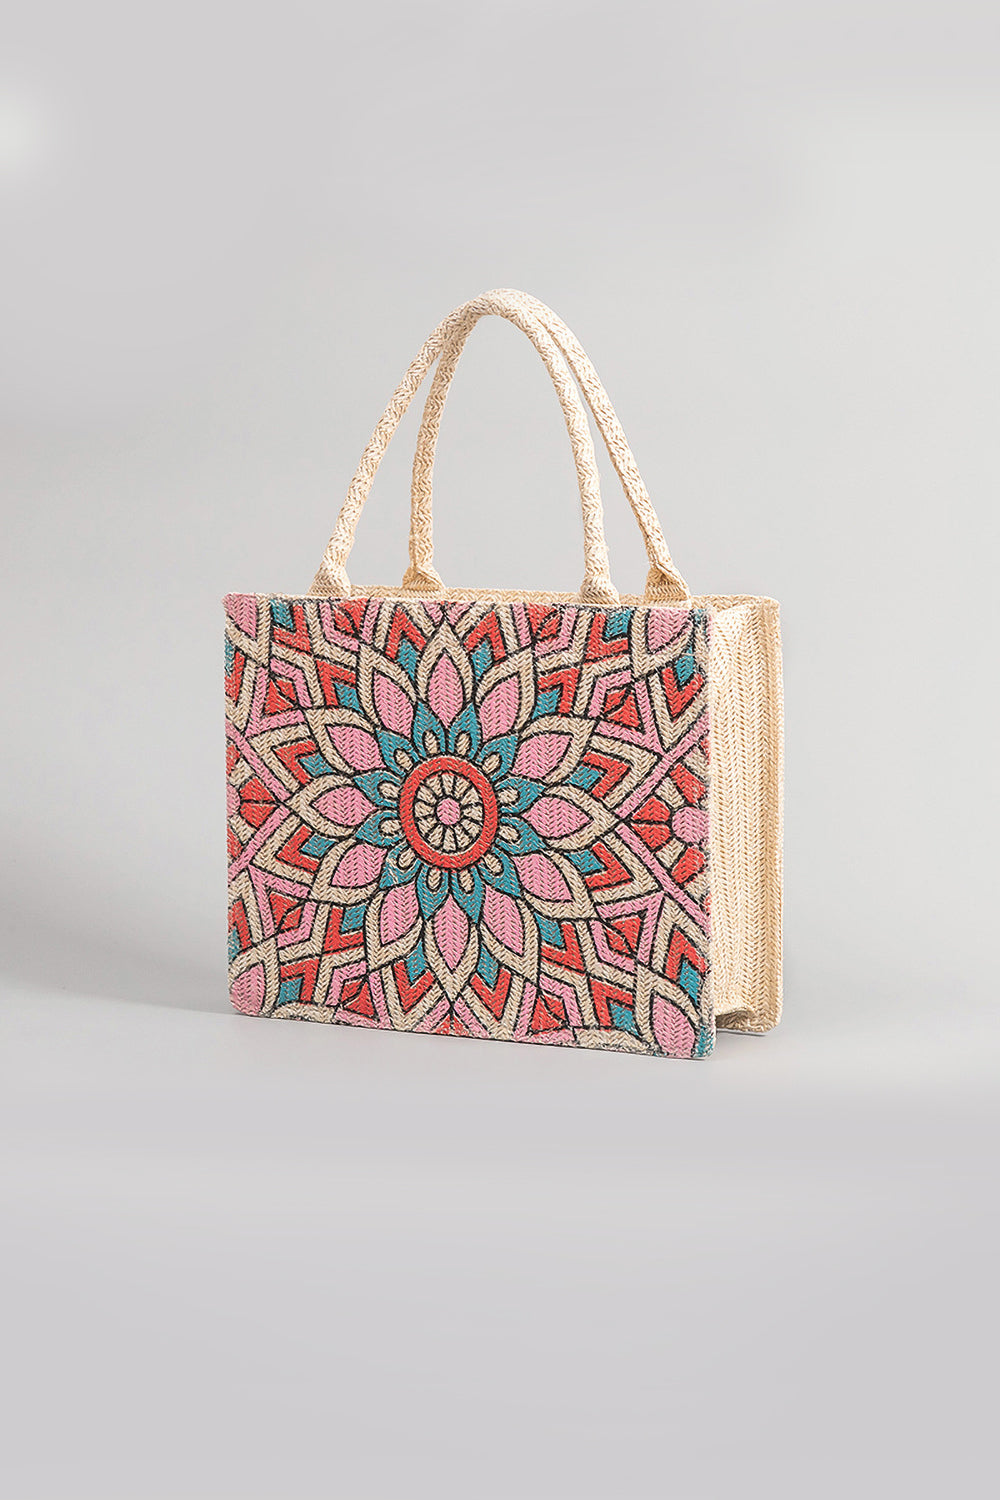 Everyday straw tote bag with colorful woven design